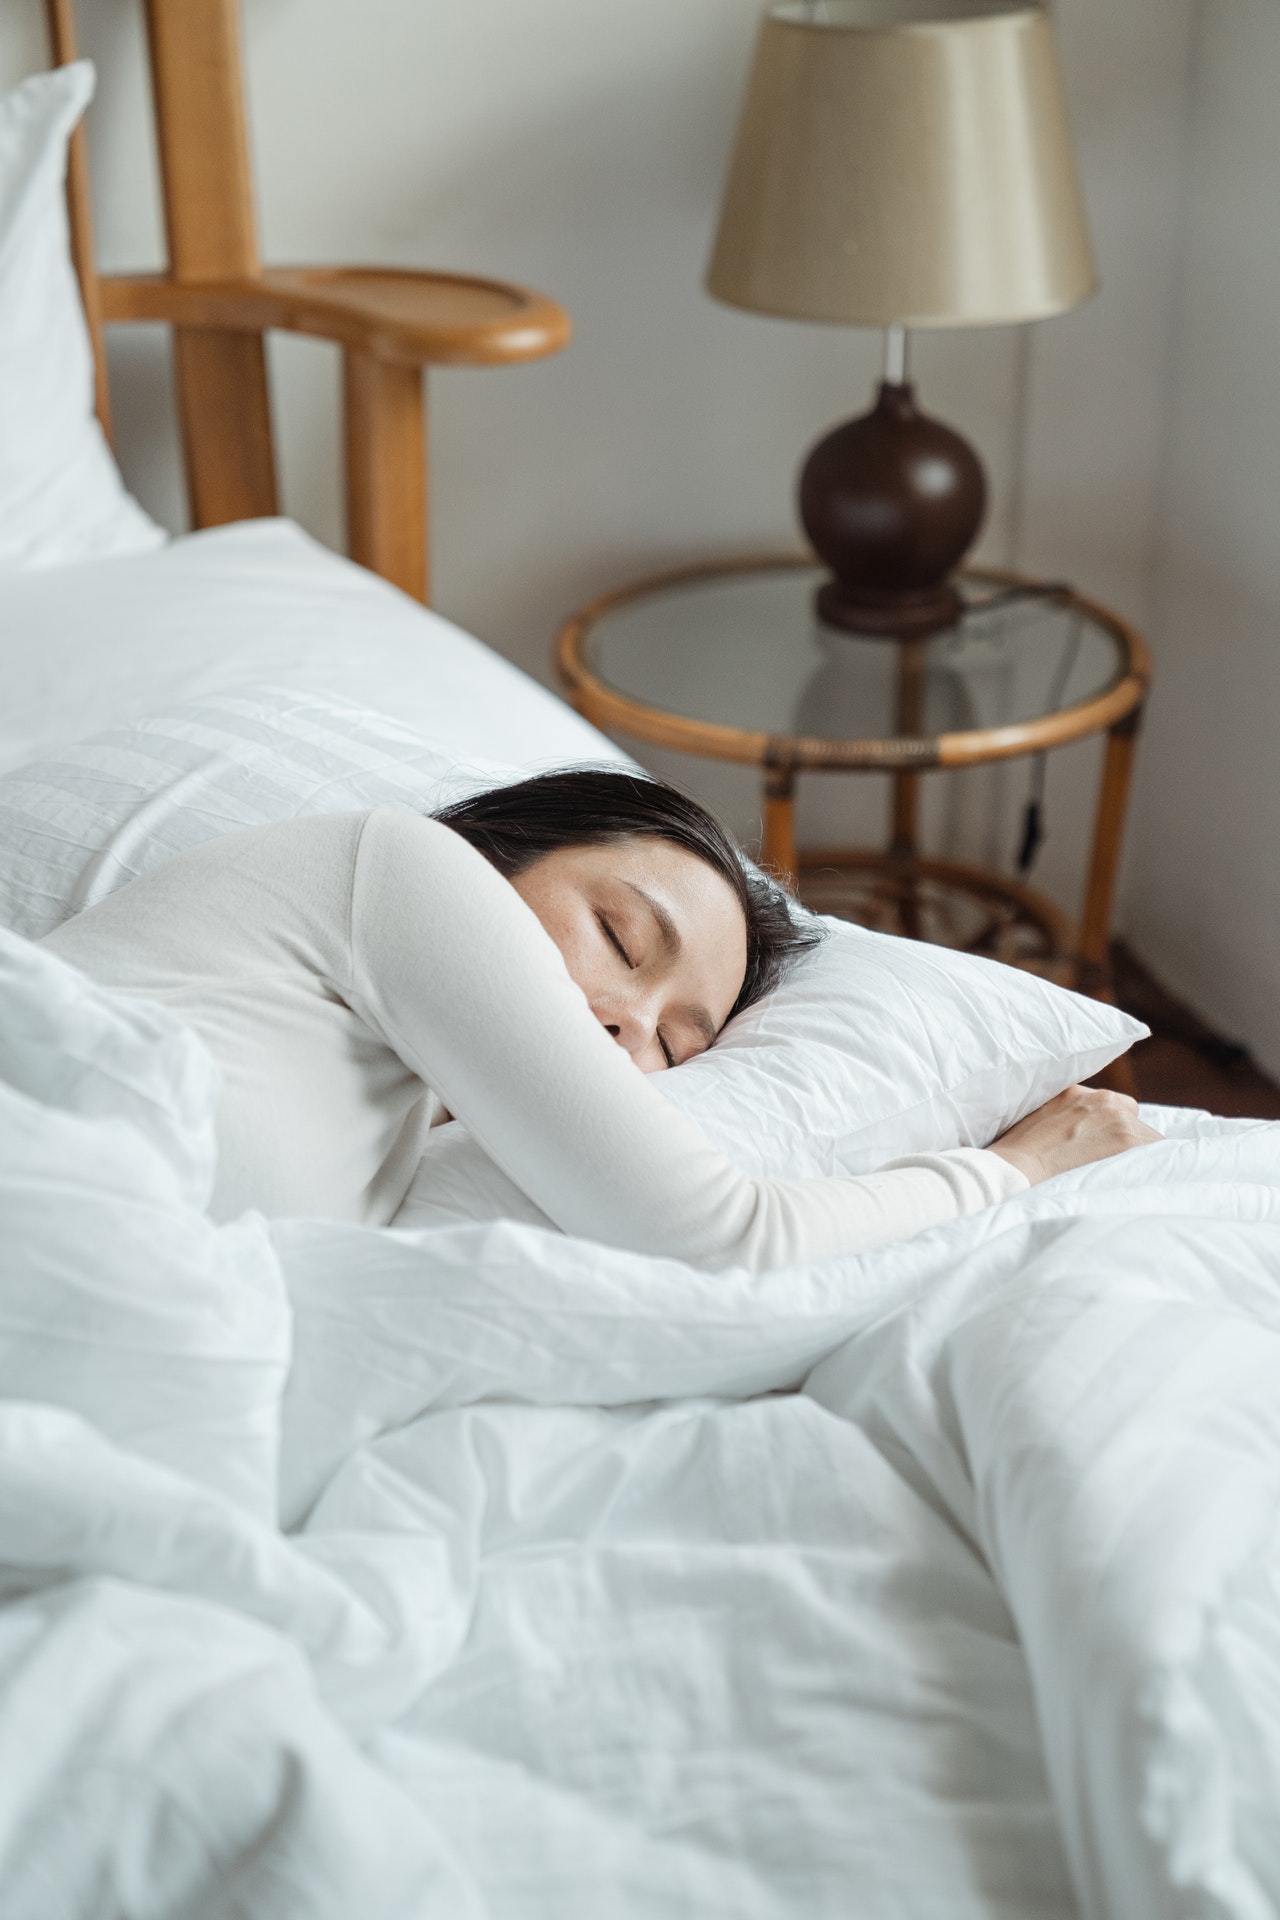 The importance of sleep in a healthy lifestyle